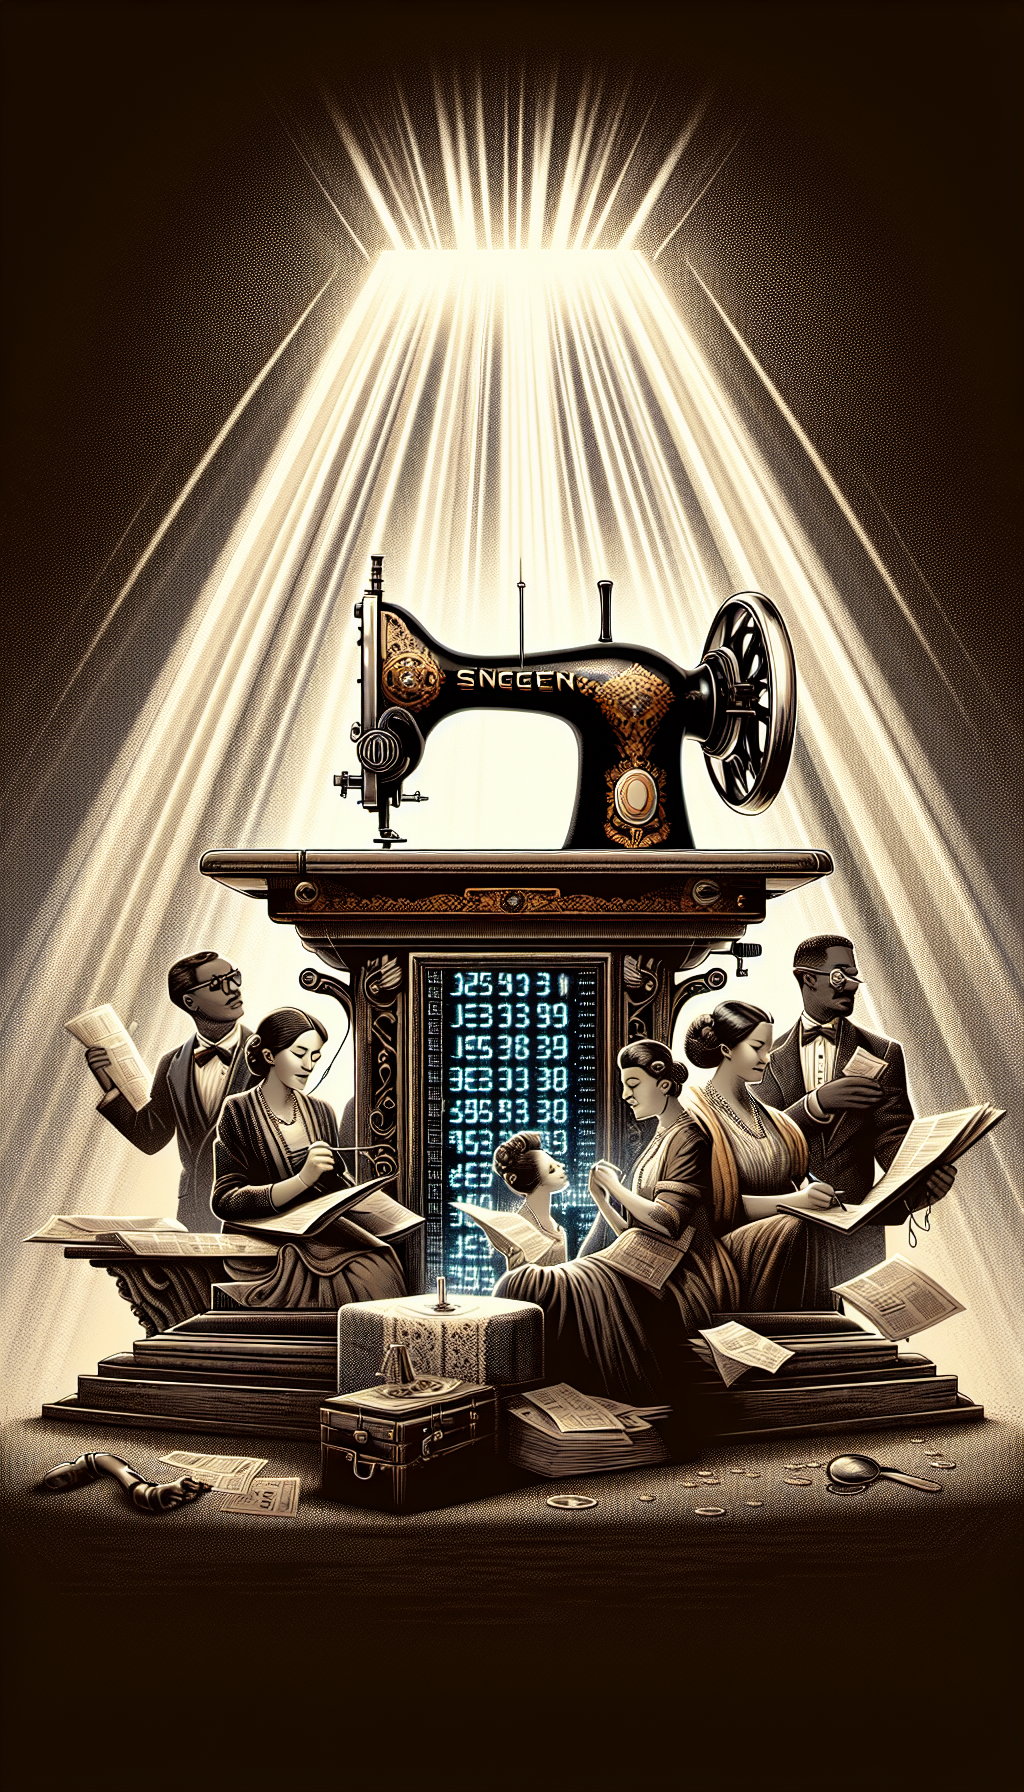 An illustration depicting a vintage Singer sewing machine sitting atop a pedestal, with rays of light casting down on it. Surrounding the machine are various characters resembling appraisers, with monocles and magnifying glasses, examining the machine. Above, digital numbers like an auction display increase in value, blending traditional and pixel art styles, symbolizing its growing monetary potential.